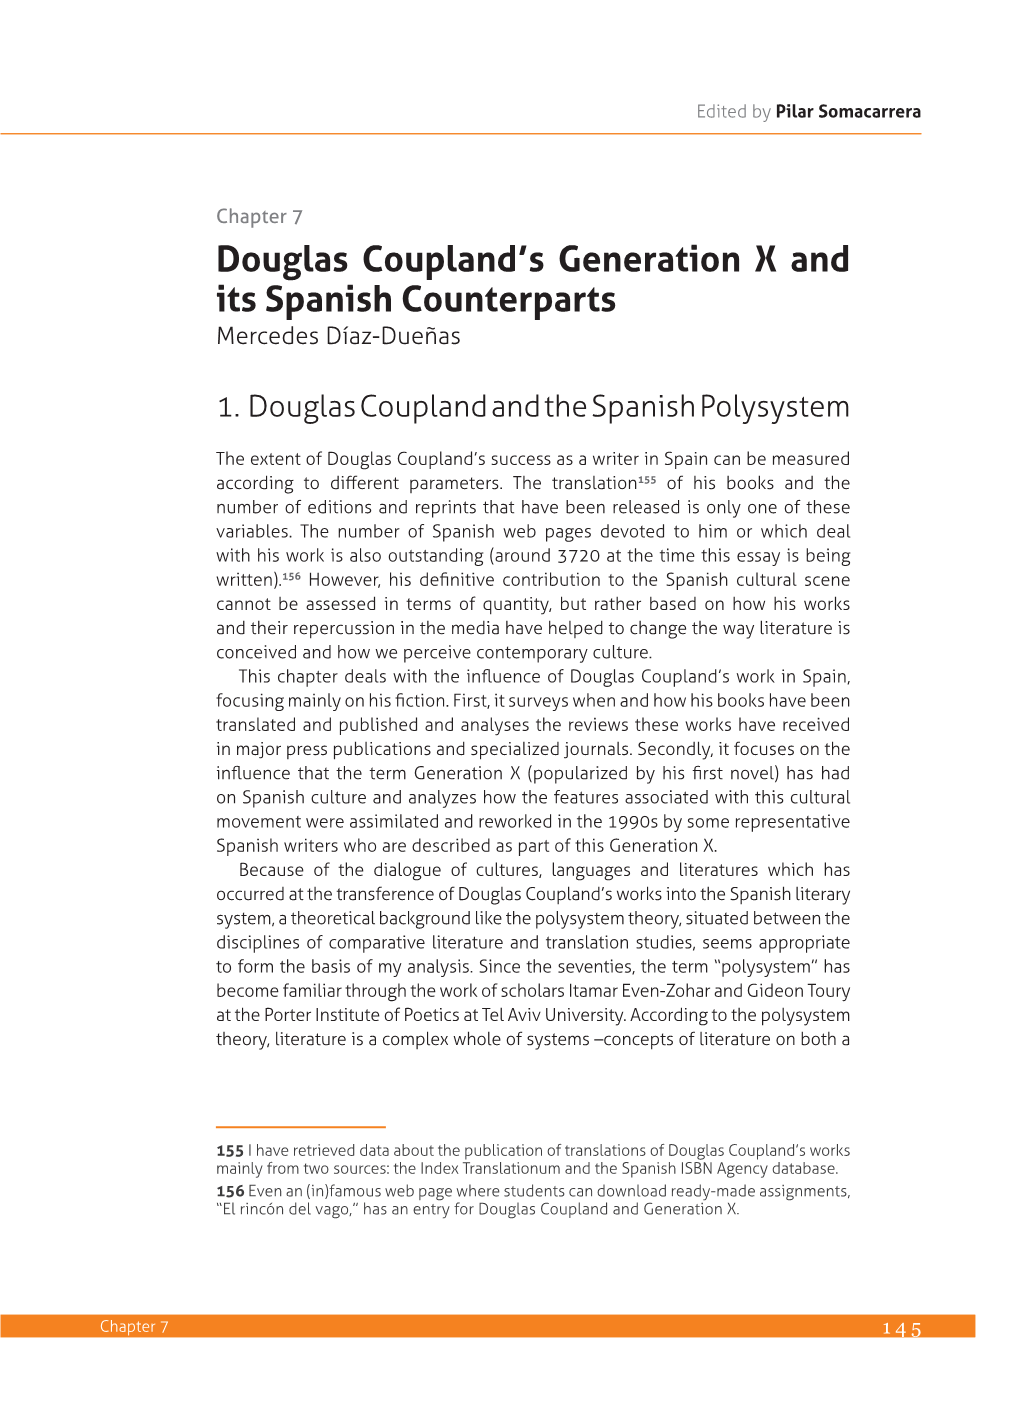 Douglas Coupland's Generation X and Its Spanish Counterparts